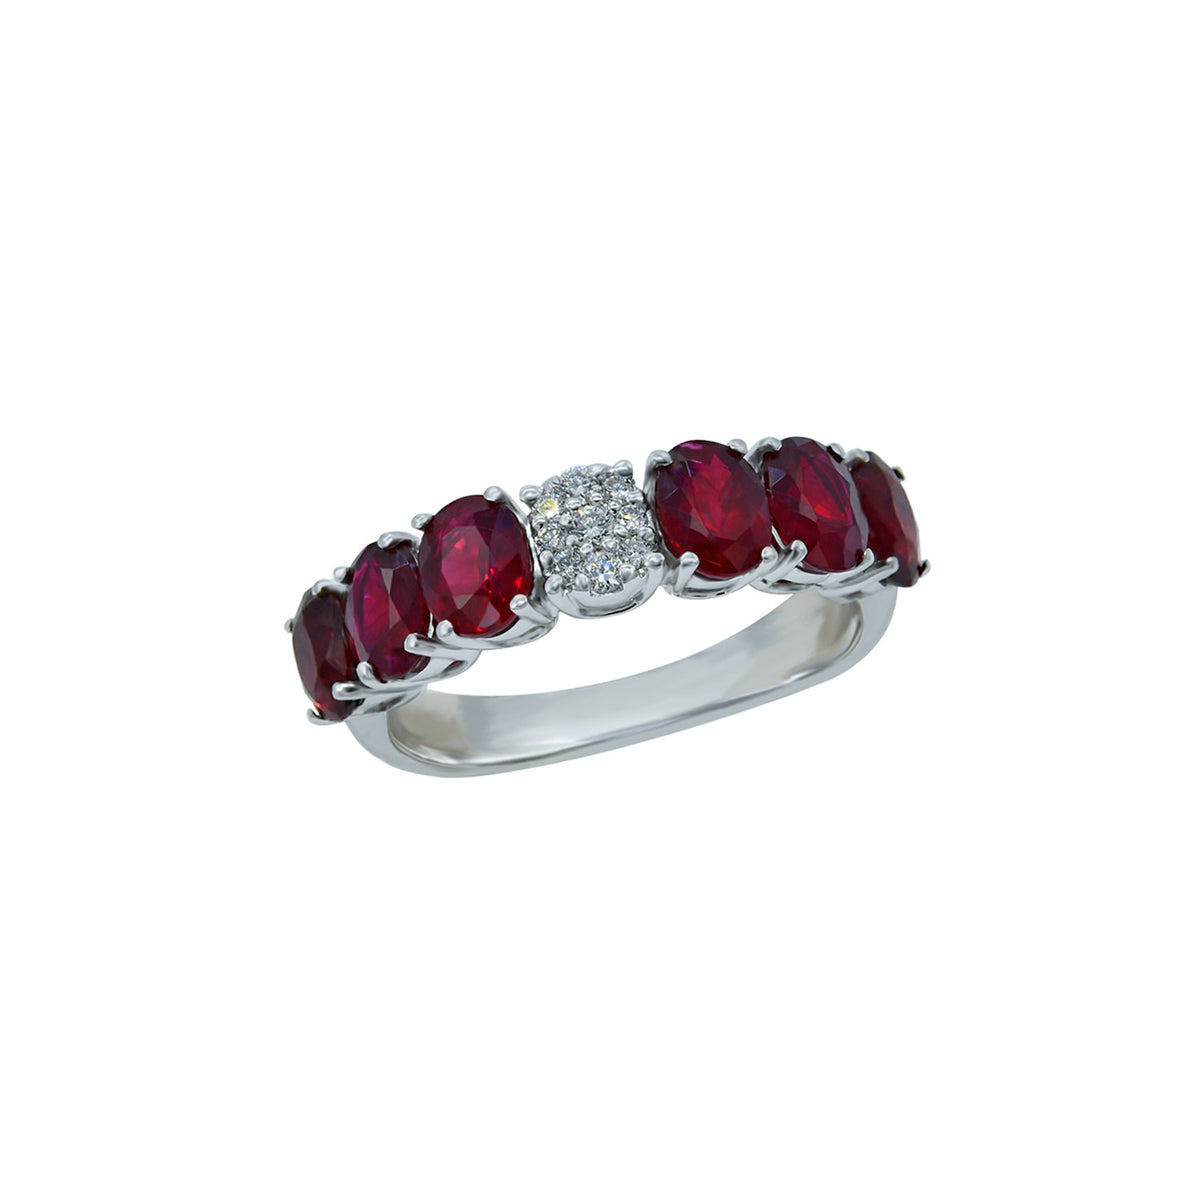 Ruby Band. Ruby and diamond ring. Oval rubies ring.